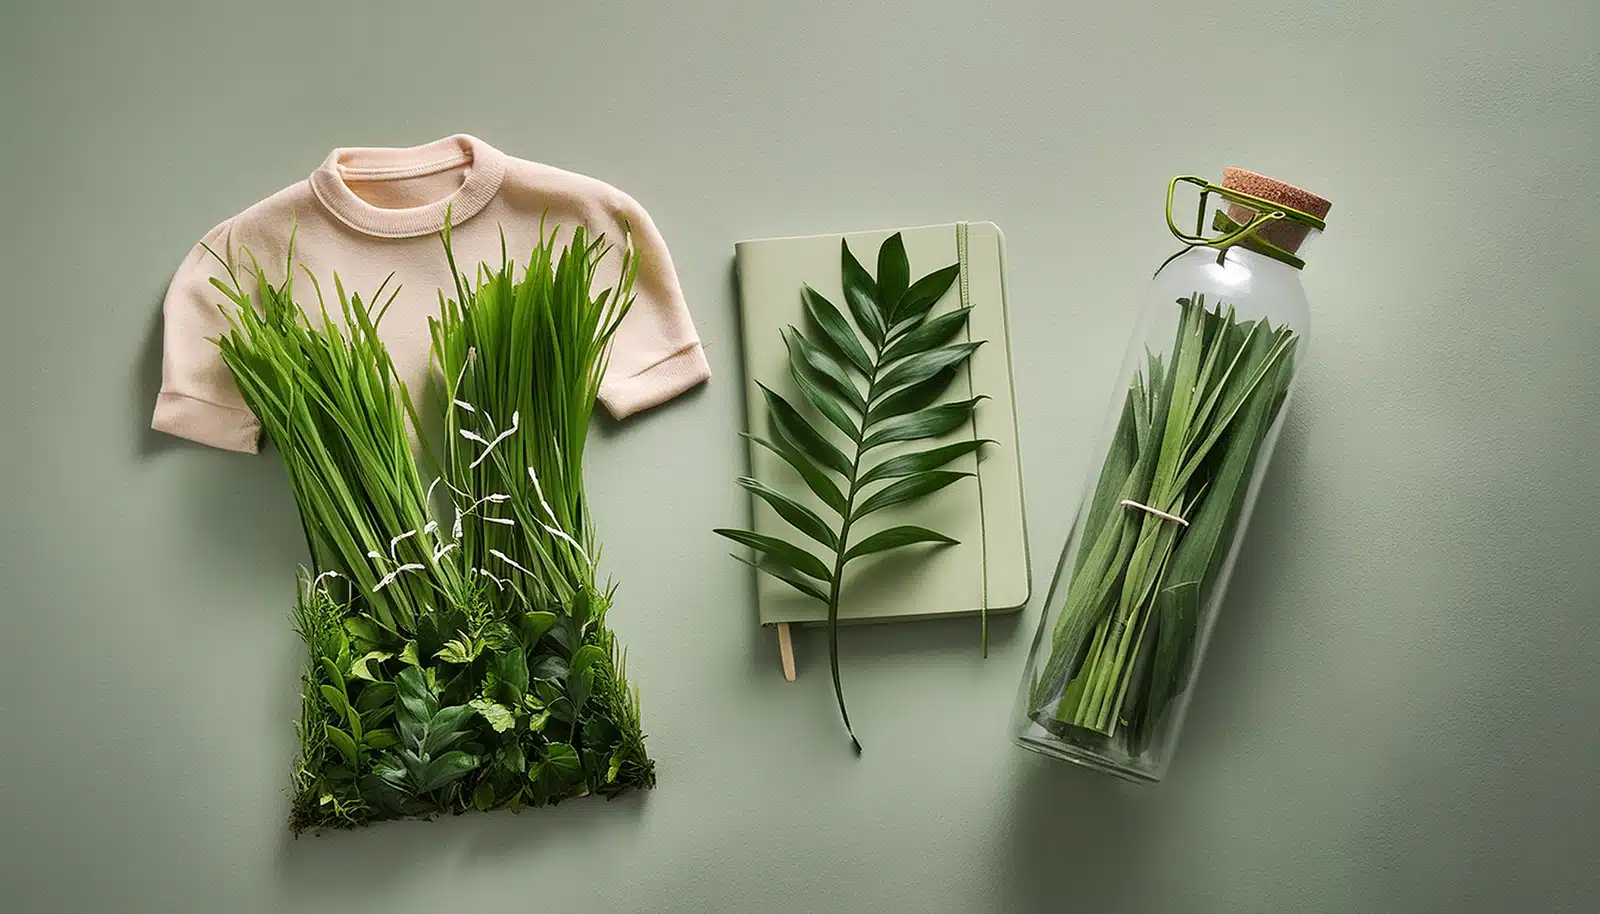 T-shirt, notebook, and water bottle made out of plants, leaves & grass.